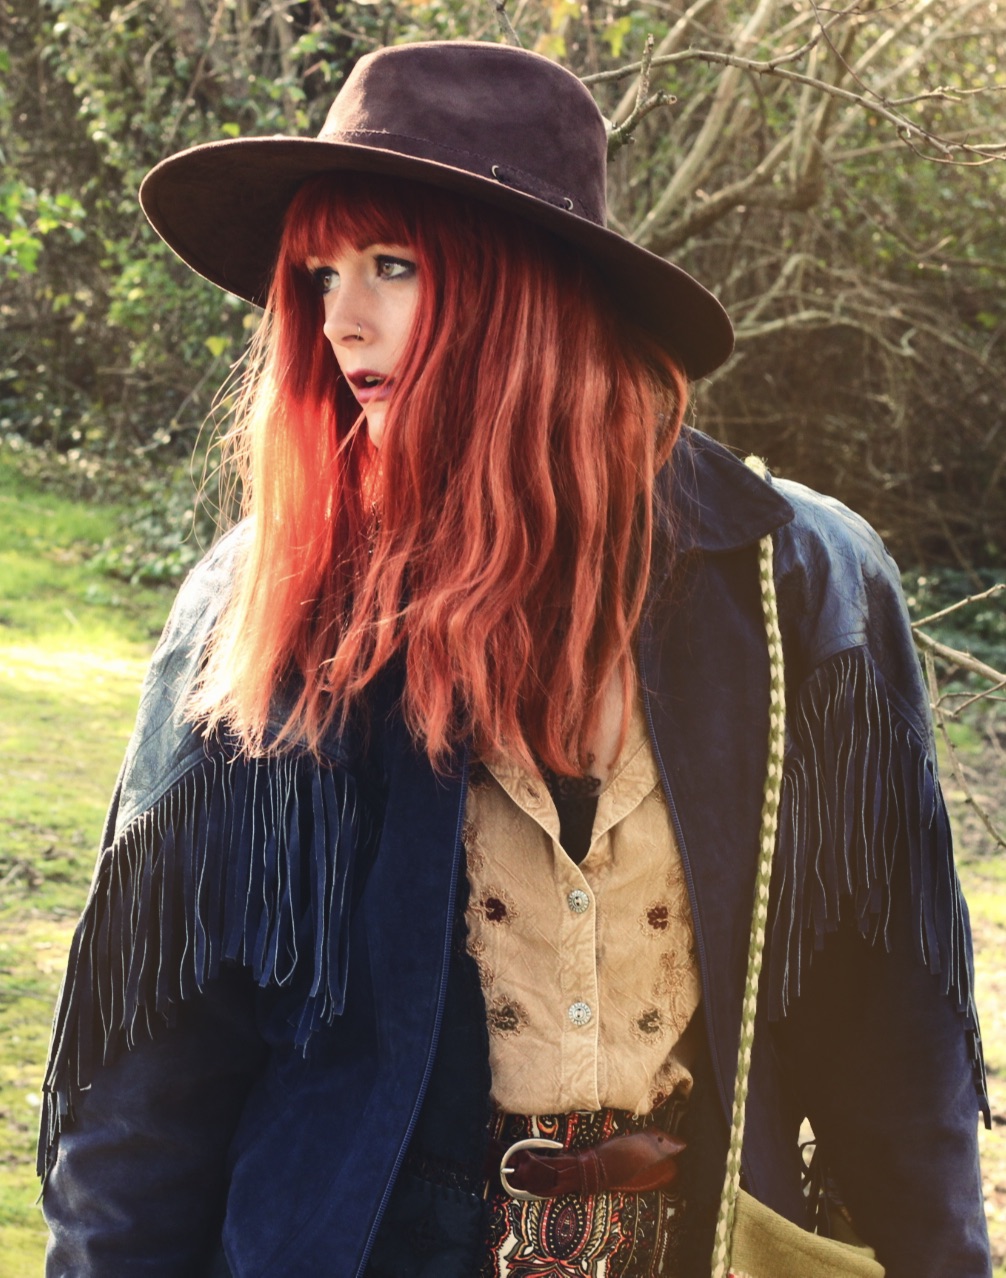 Blue Suede Vintage Fringed Jacket & 70's Inspired Outfit